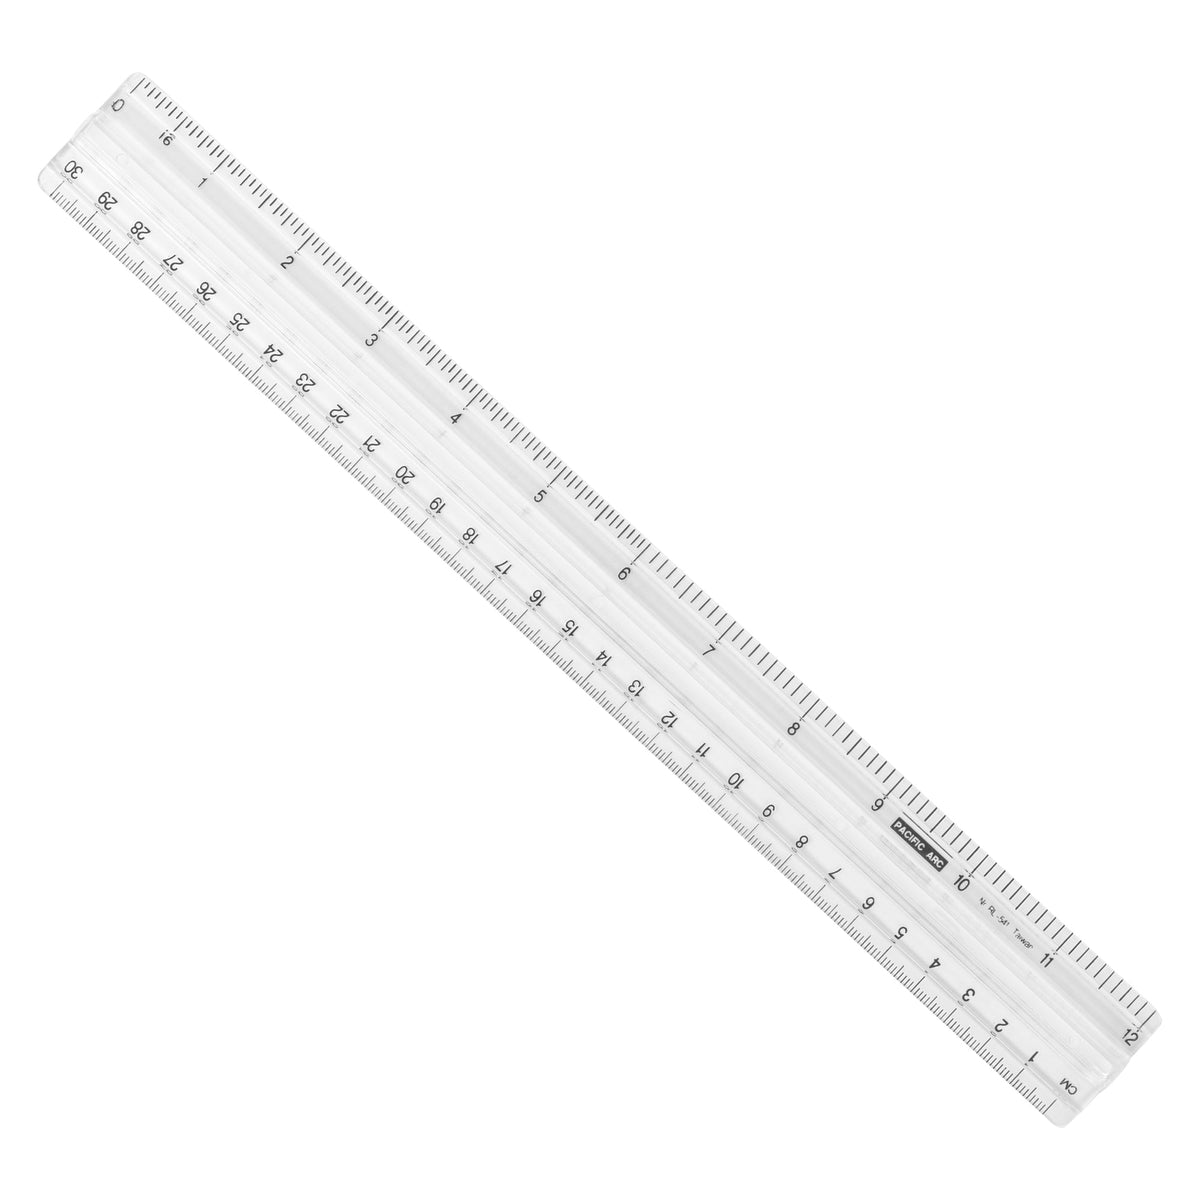 Pacific Arc 12 Inch Ruler Clear Plastic, Graduations in Inches and  Centimeters